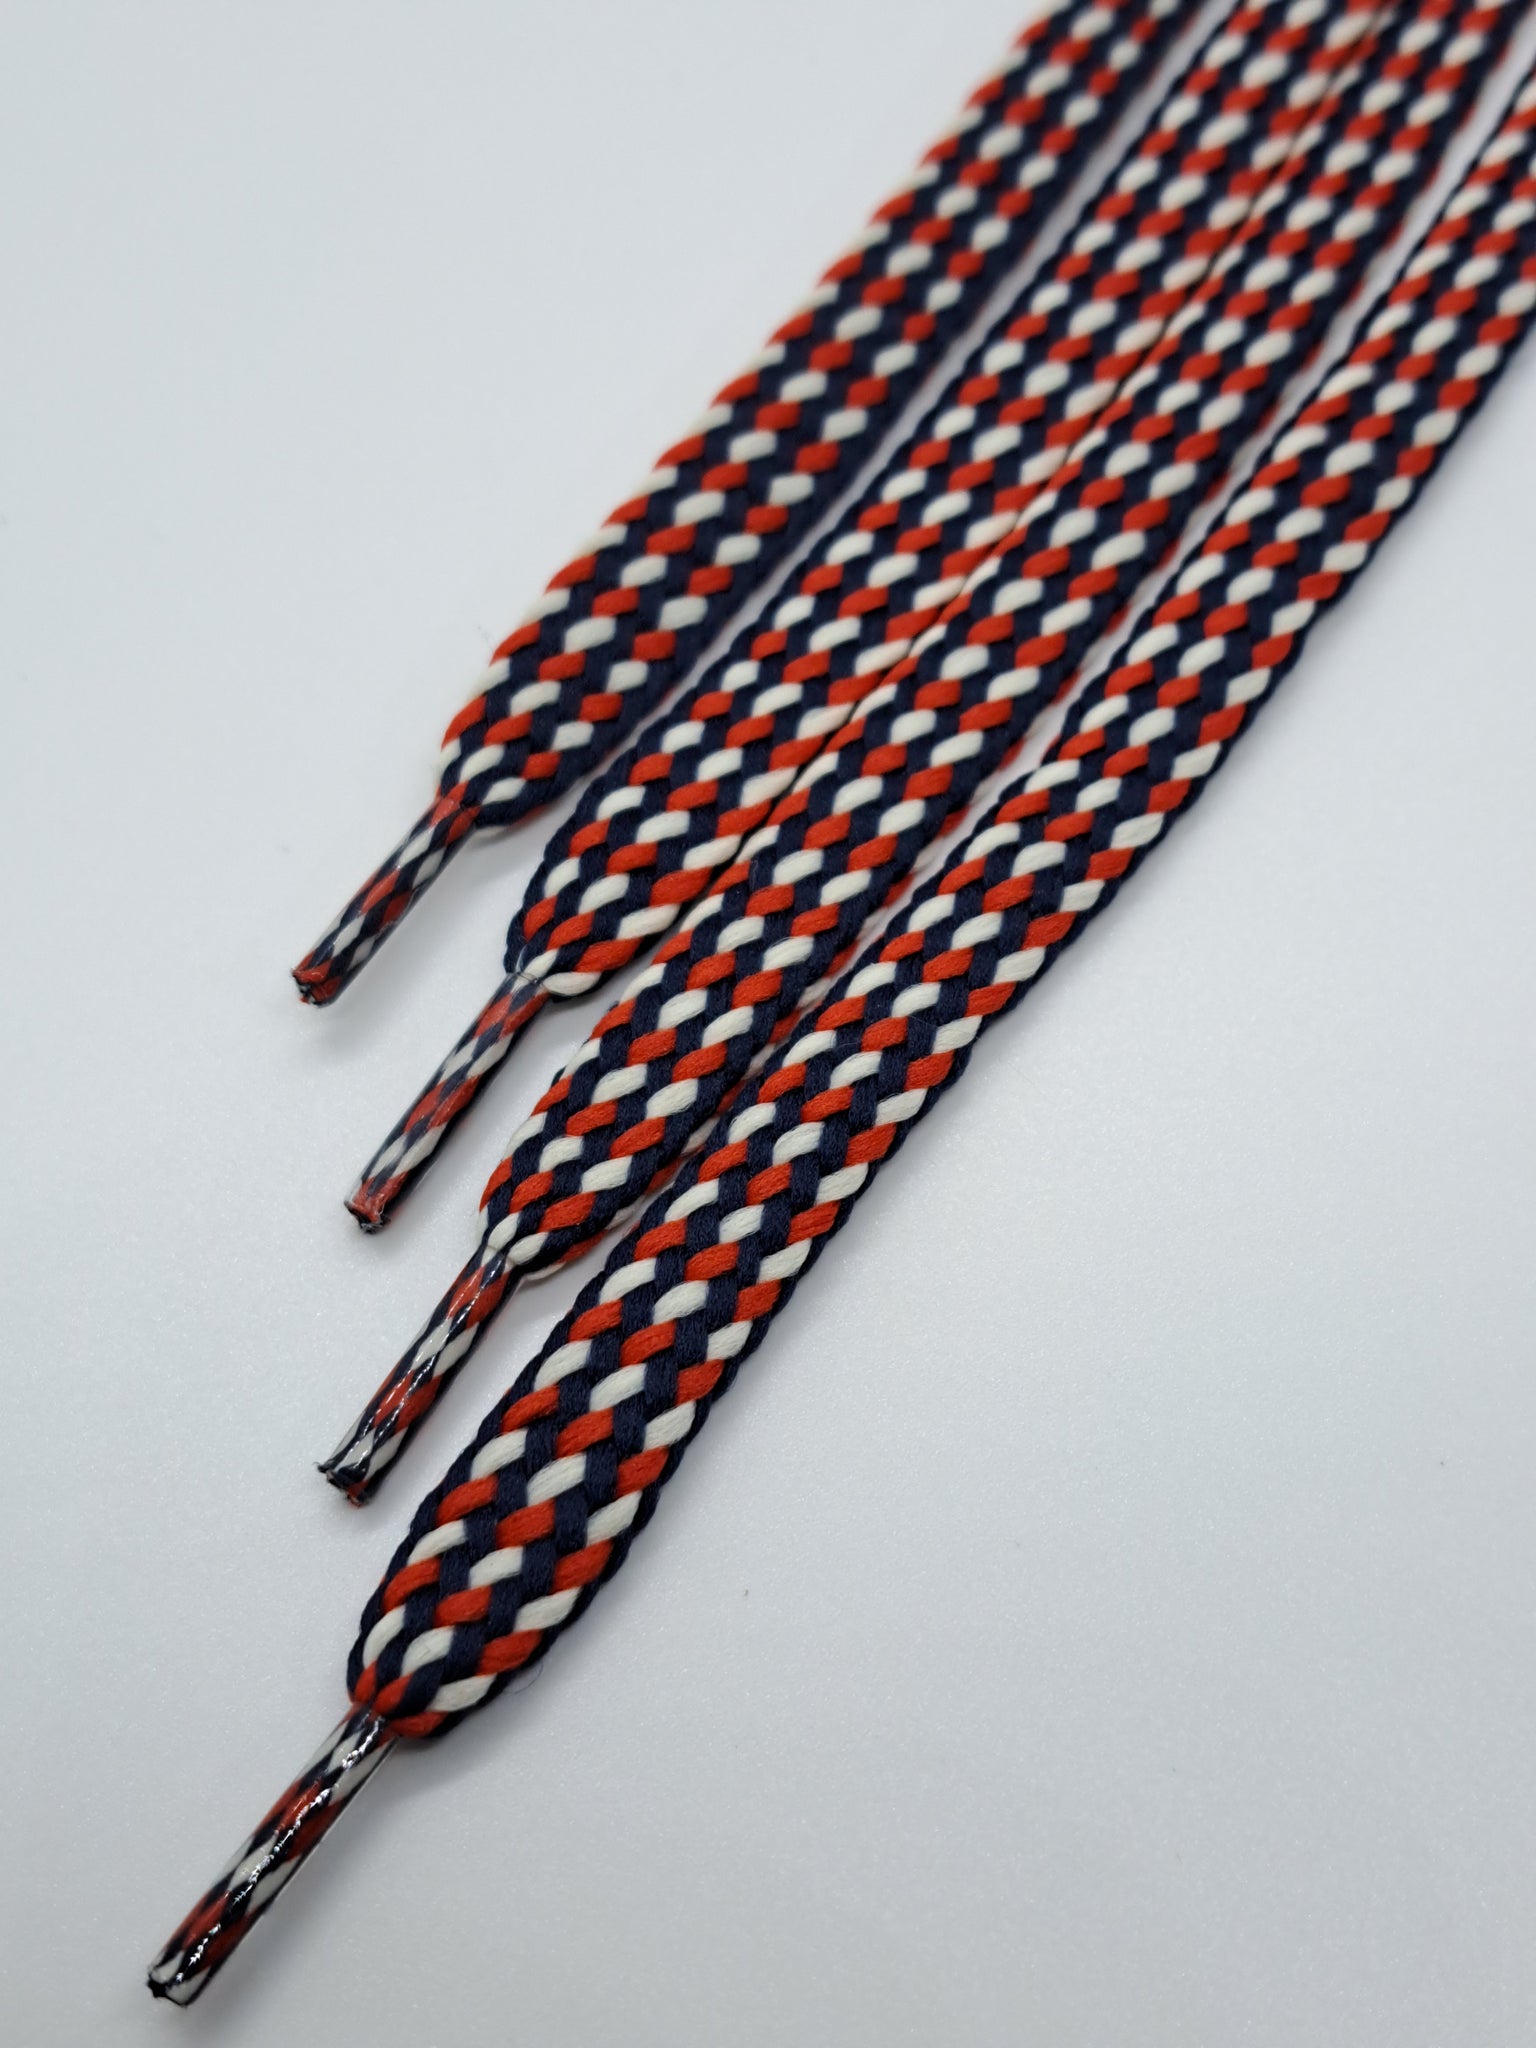 Flat Multi-Color Shoelaces - Red, White and Blue